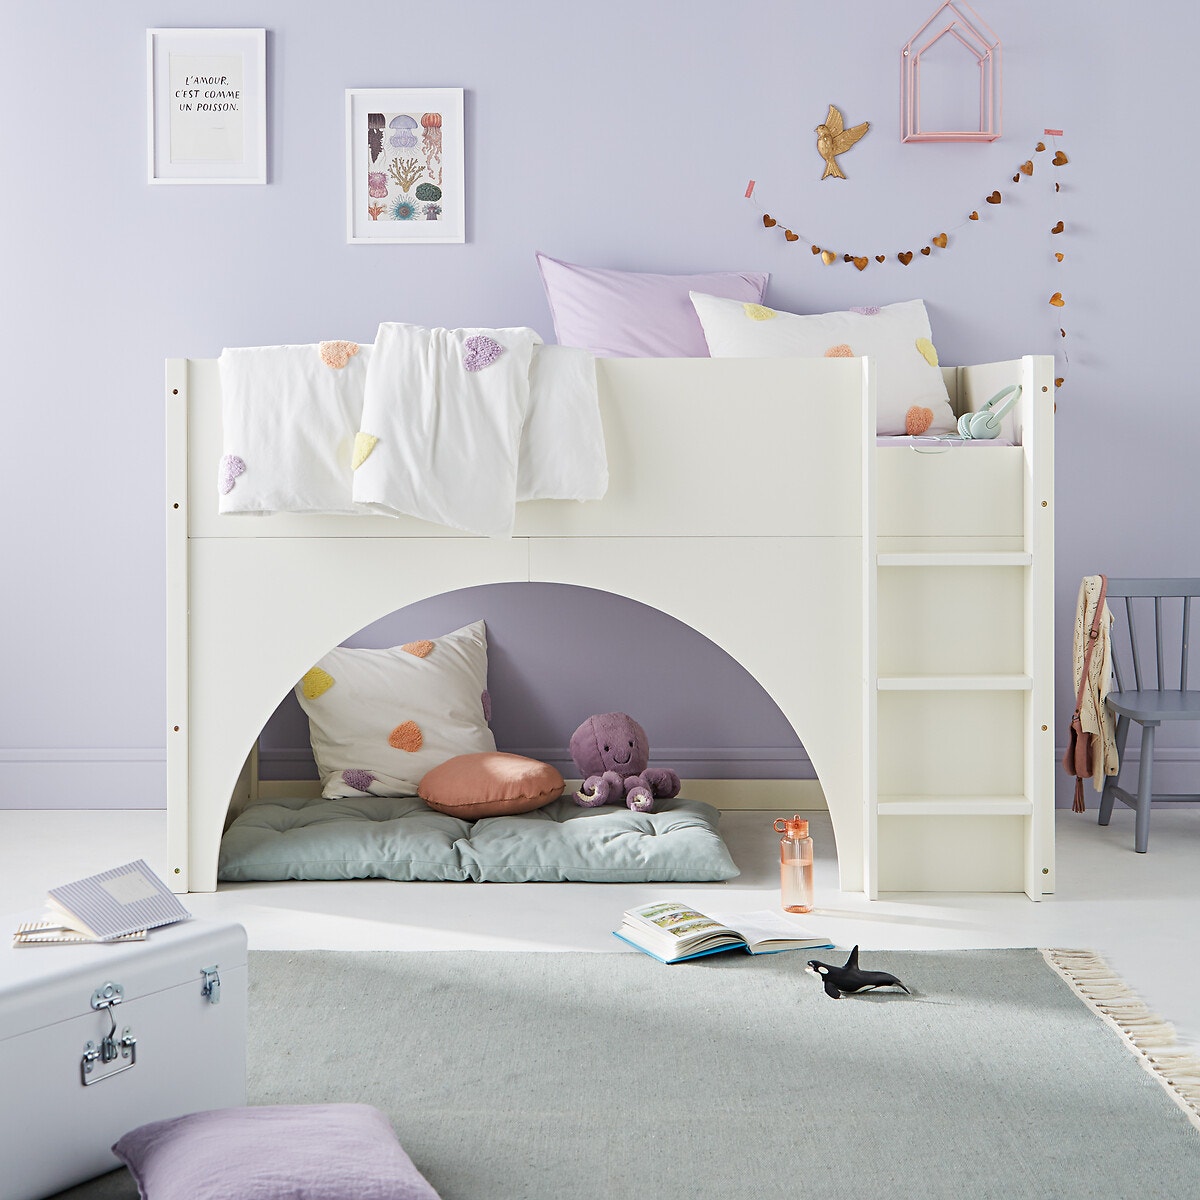 A Comfortable Cabin Bed In The Children's Bedroom 